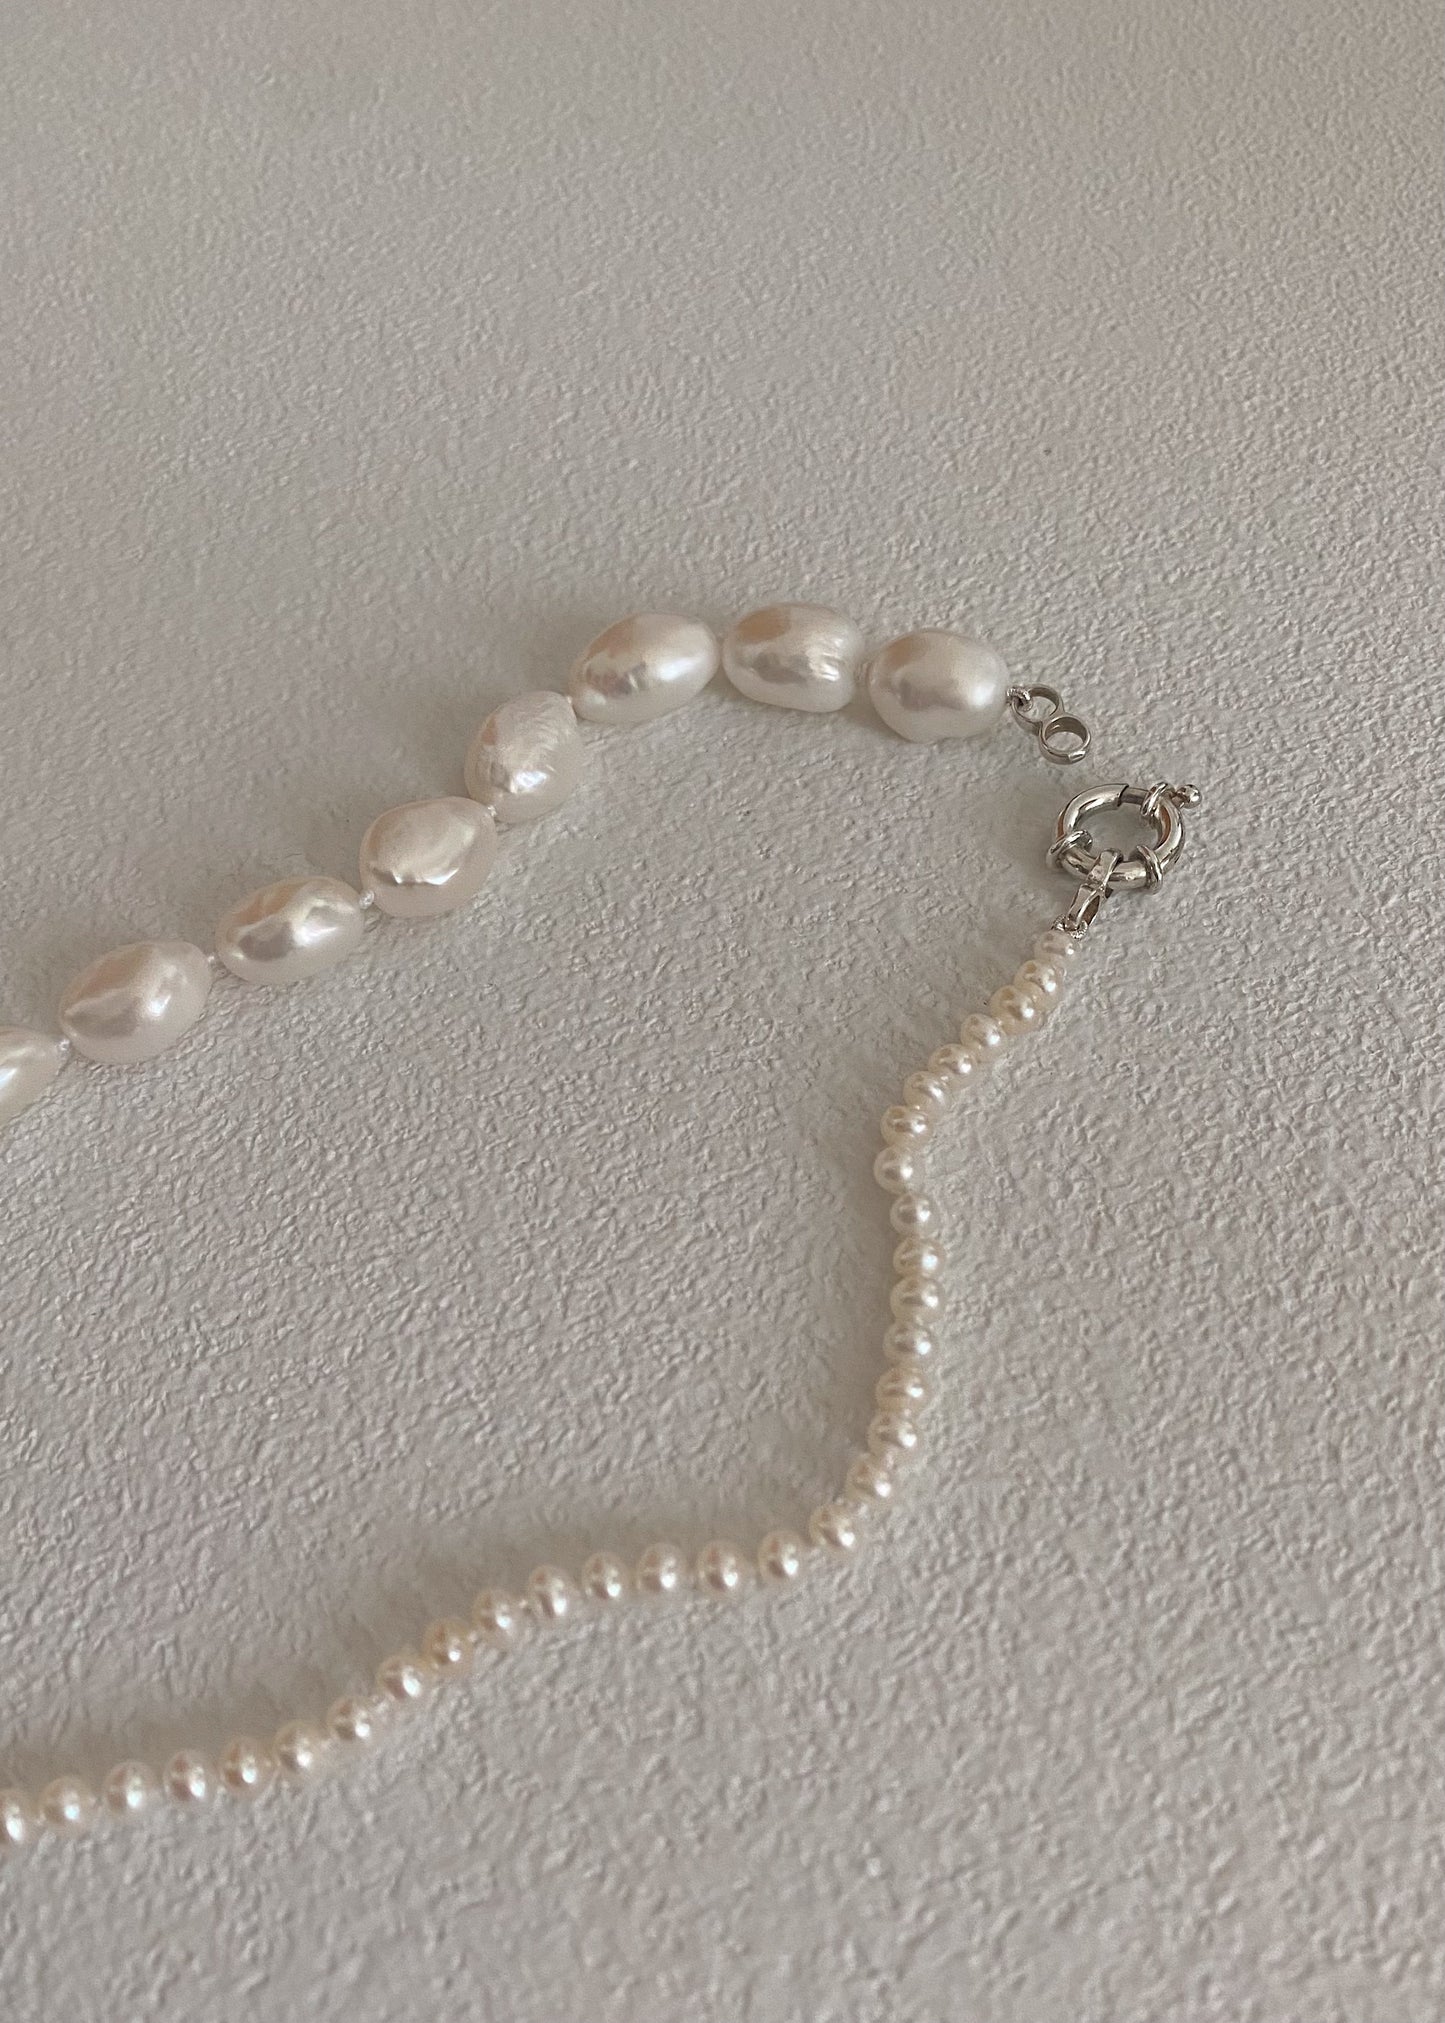 Amor pearl necklace